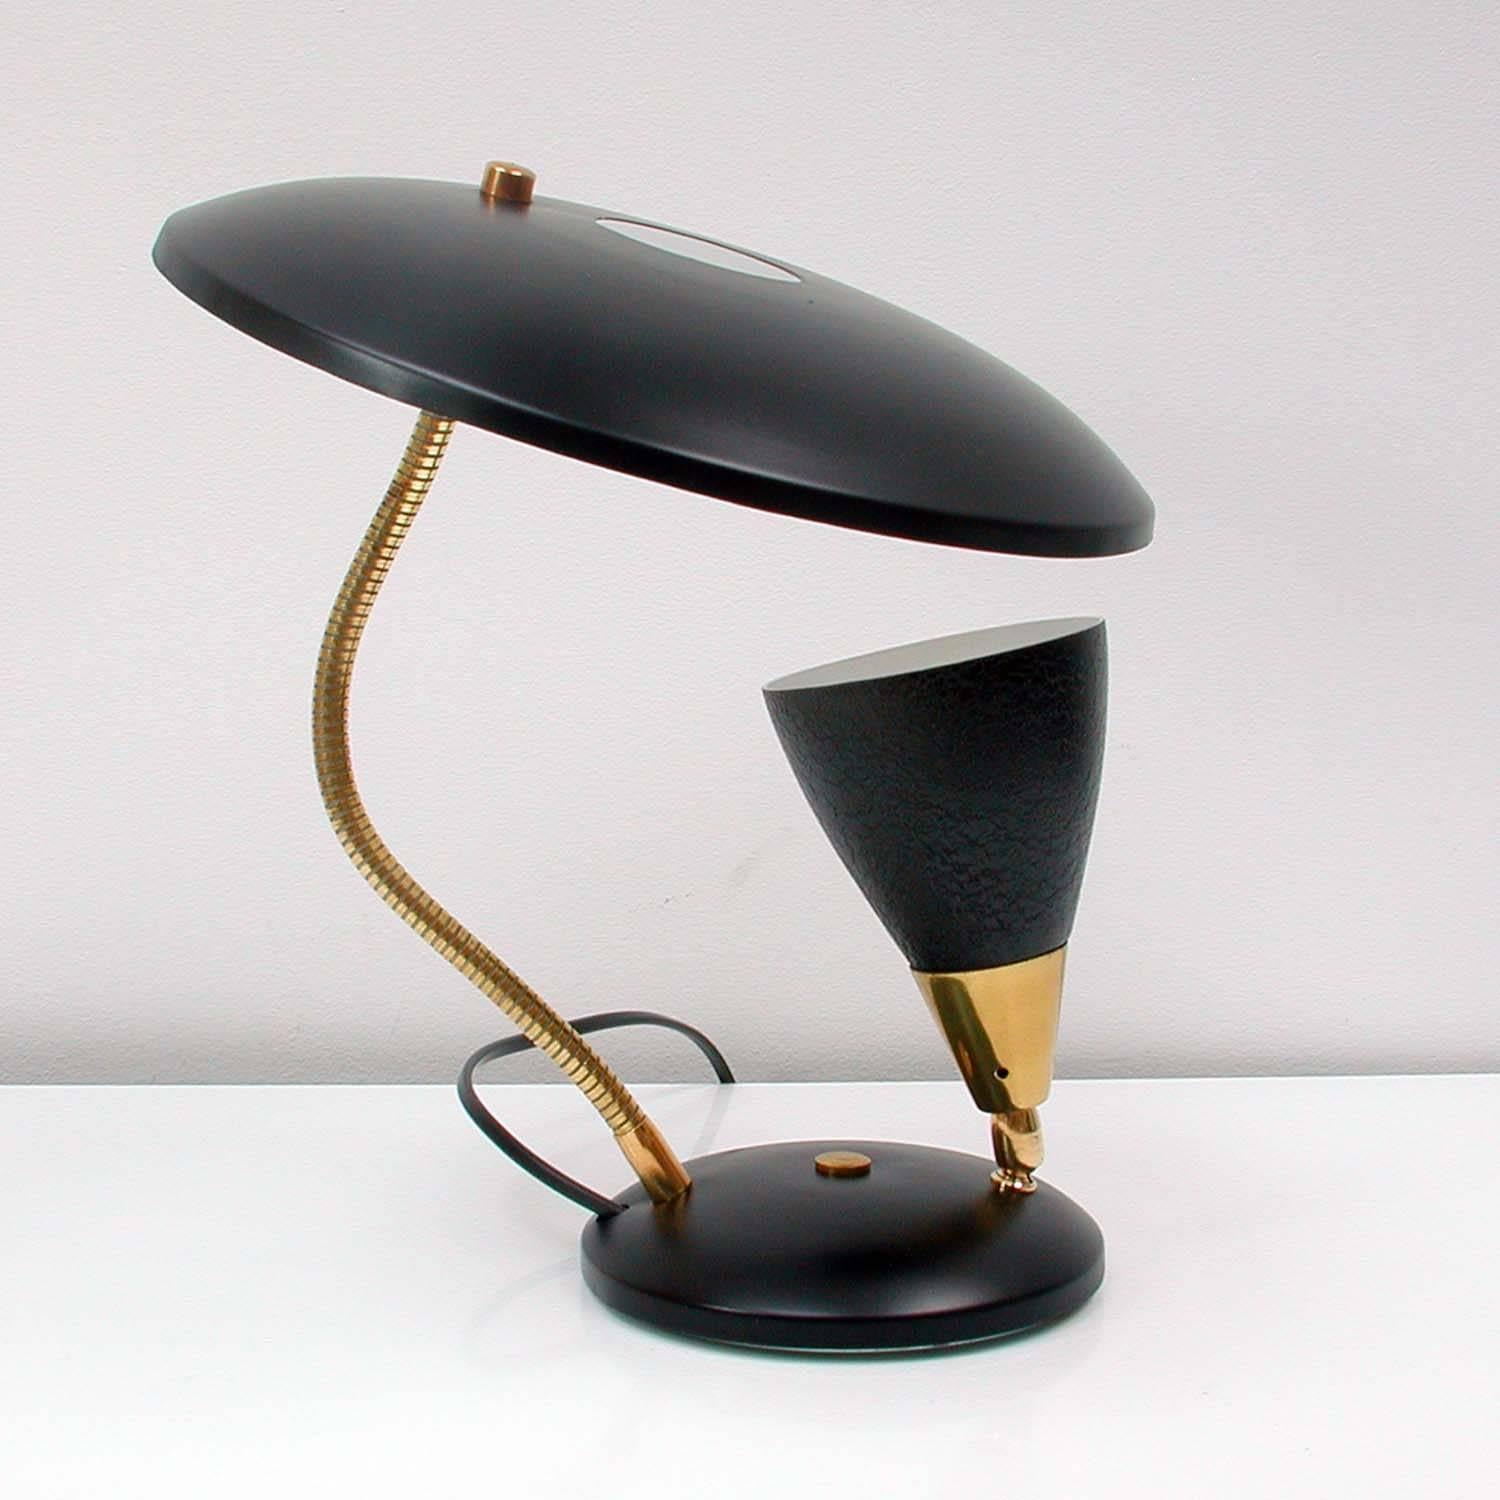 This Midcentury table light was designed and manufacrured in France in the 1950s.

It has got a black reflecting lampshade, a gooseneck lamp arm and an adjustable black and brass bulb holder.
The lamp is in excellent vintage condition and has been